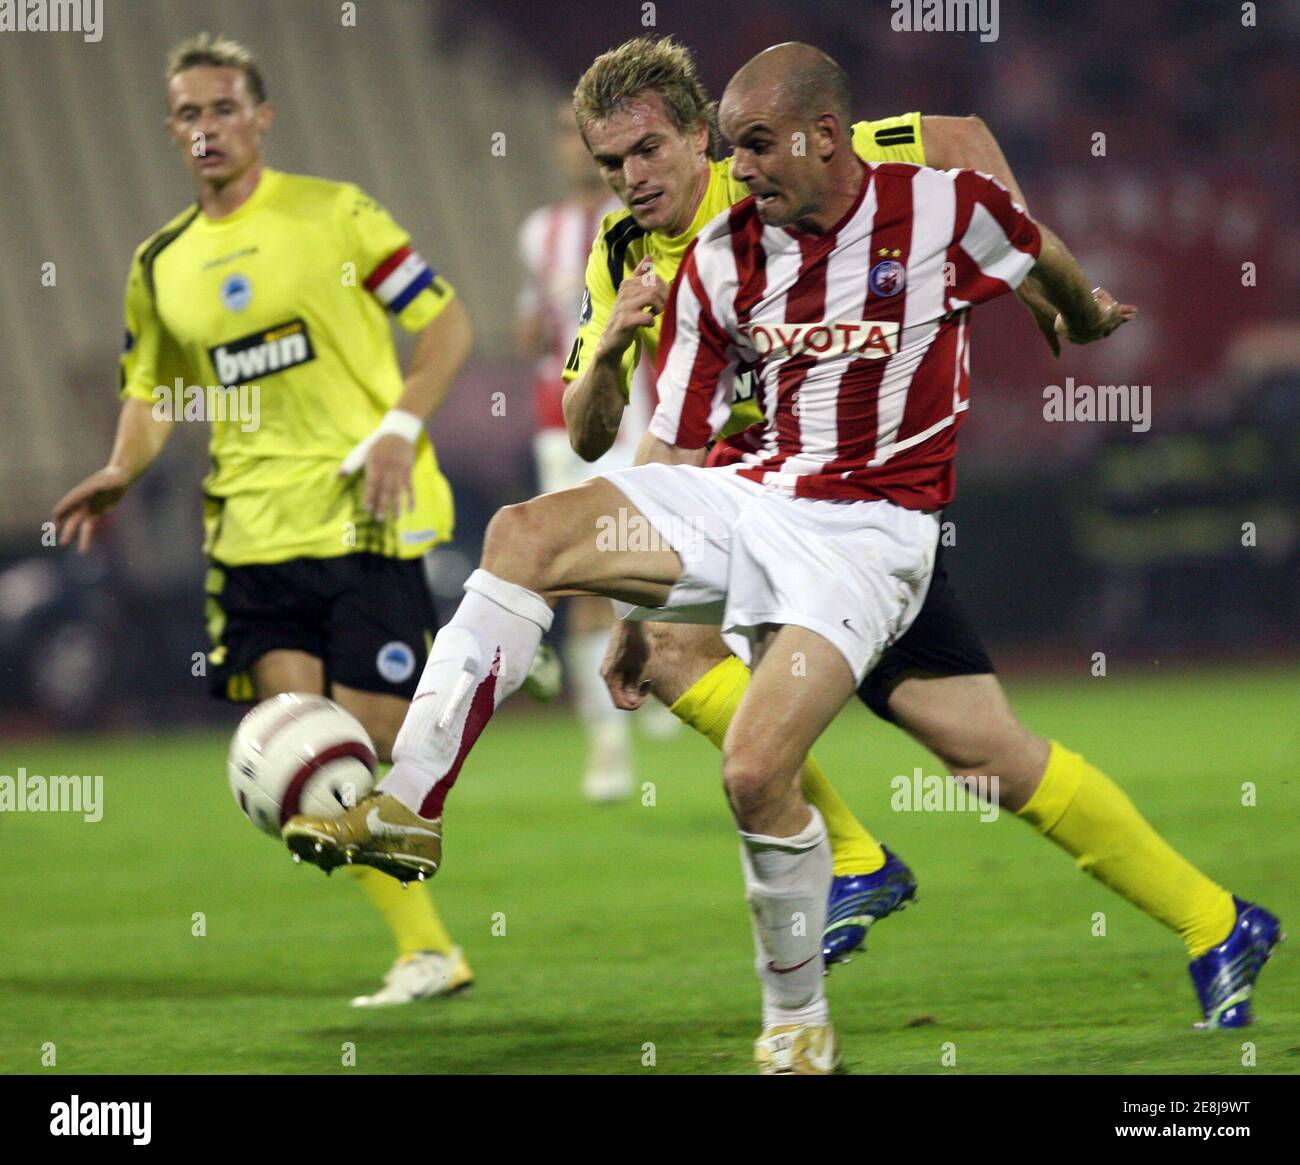 Dusan Djokic (front) of Red Star Belgrade fights for the ball with Peter Singlar of Slovan Liberec during their UEFA Cup first round, second leg soccer match in Belgrade September 28, 2006.  REUTERS/Ivan Milutinovic  (SERBIA) Stock Photo